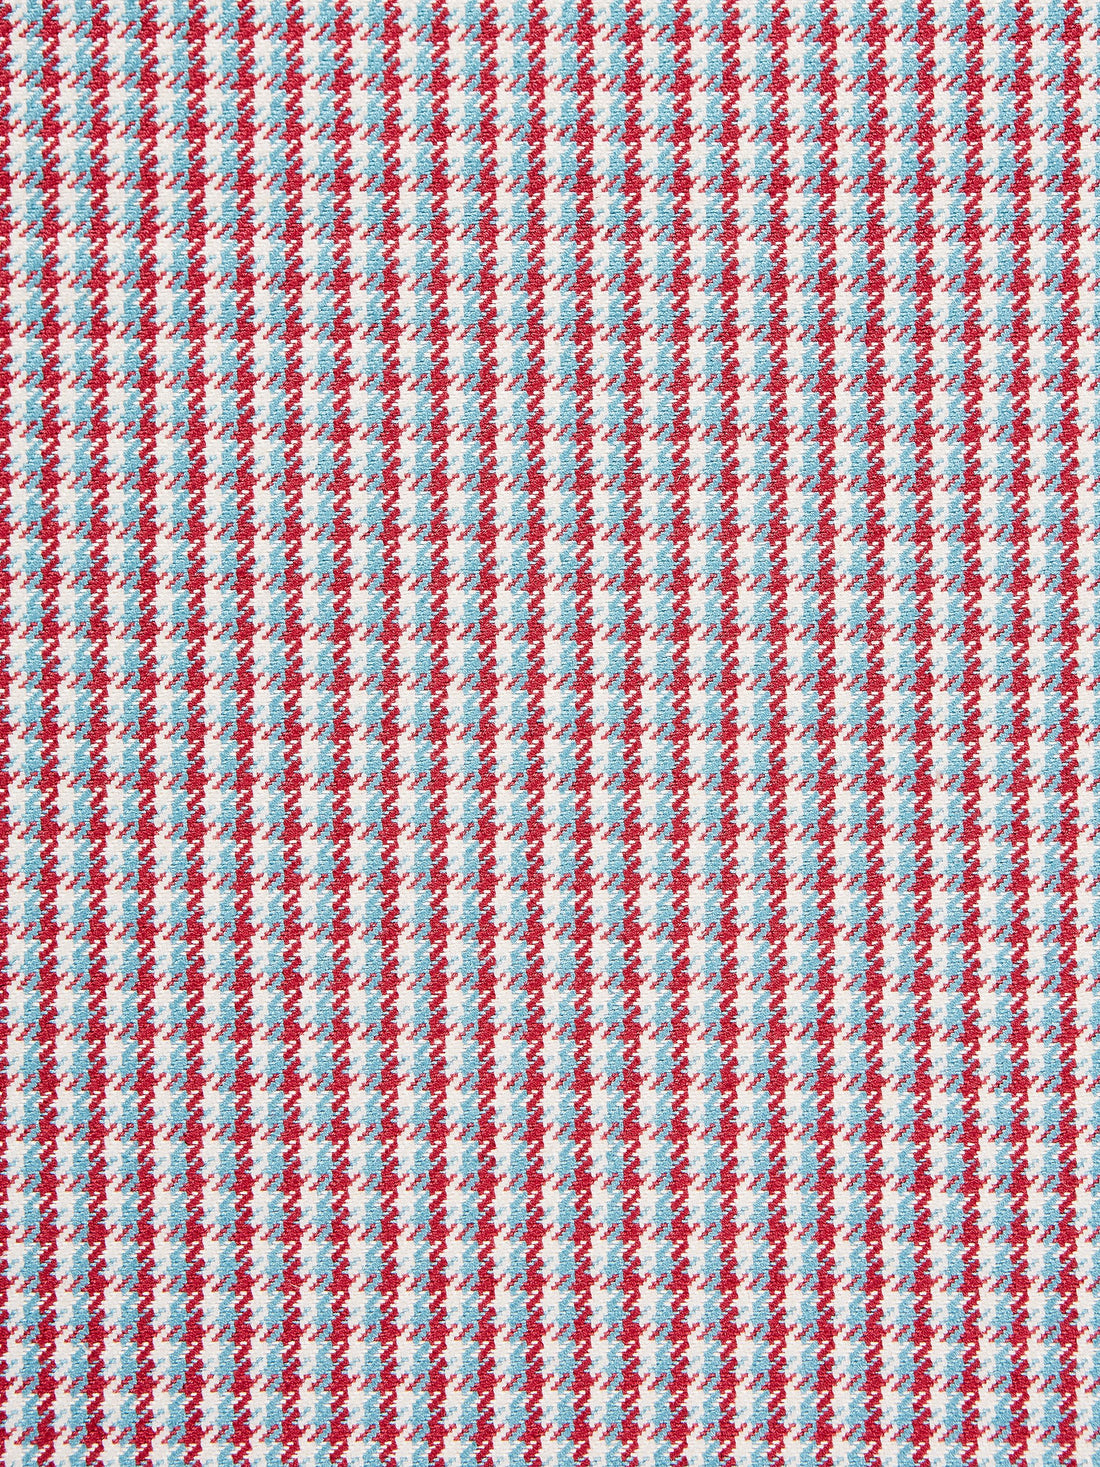 Tattersall Check fabric in aqua and cerise color - pattern number SC 000227013 - by Scalamandre in the Scalamandre Fabrics Book 1 collection